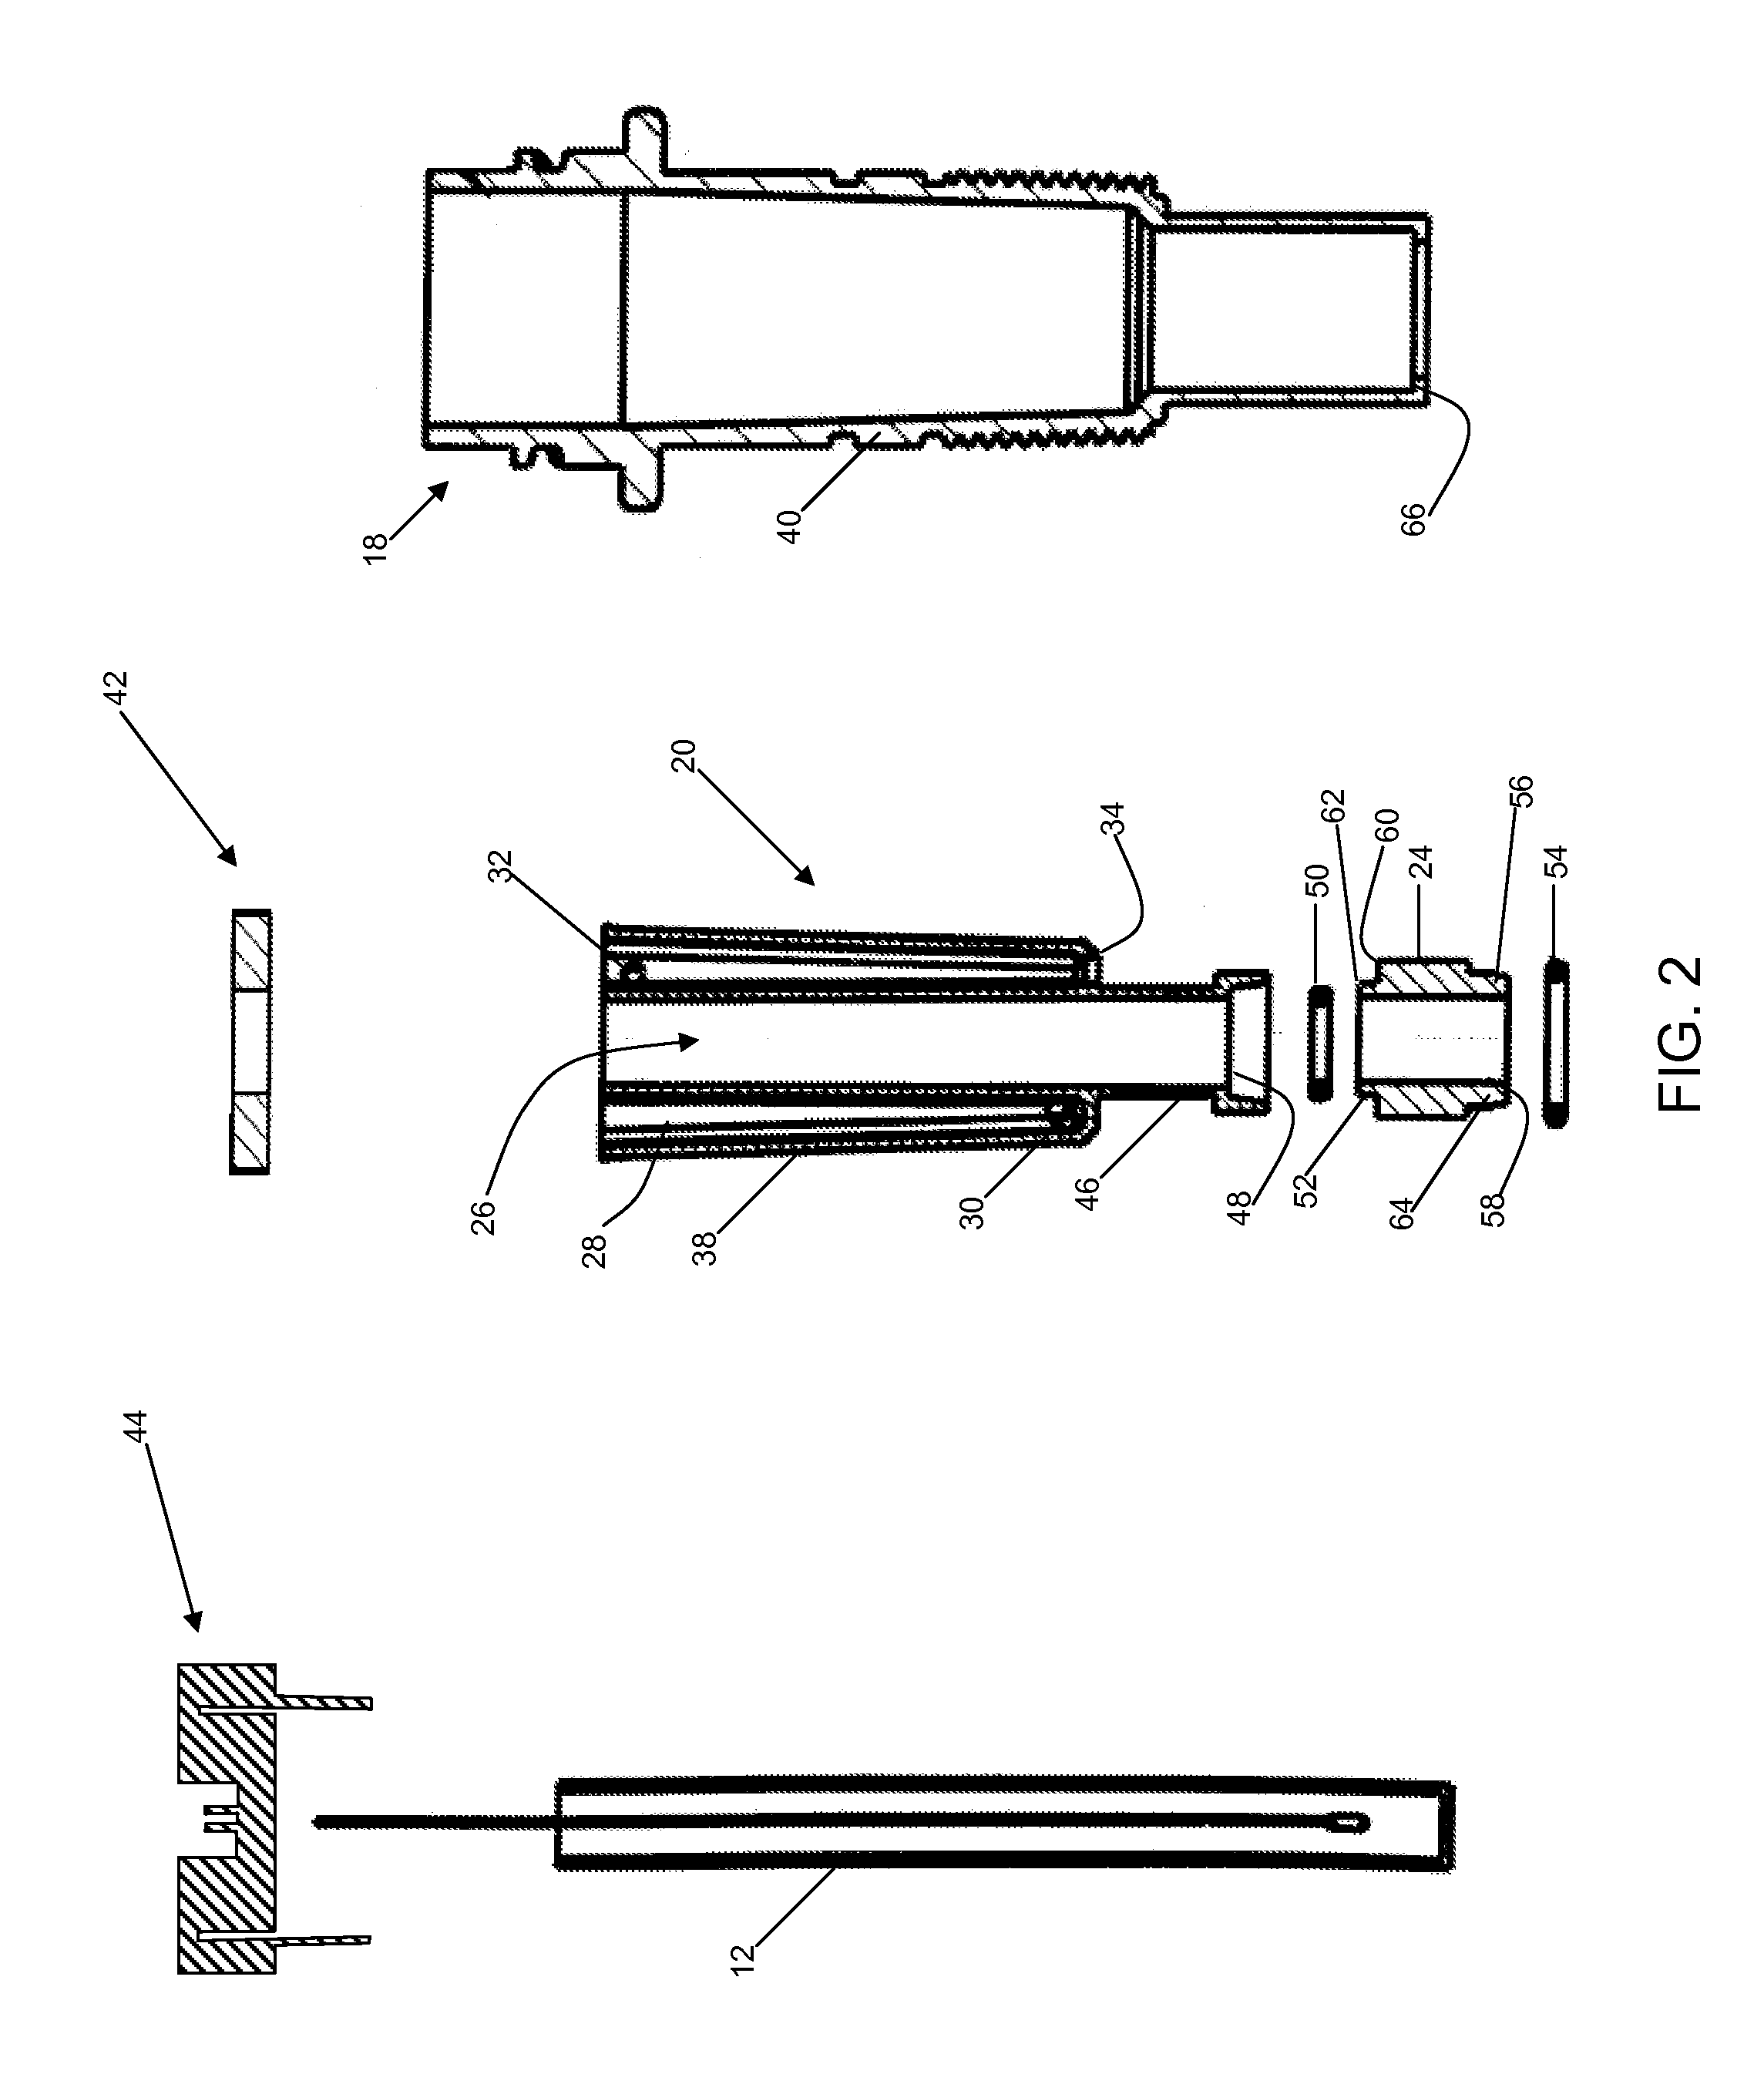 Electrochemical sensor and method of manufacture